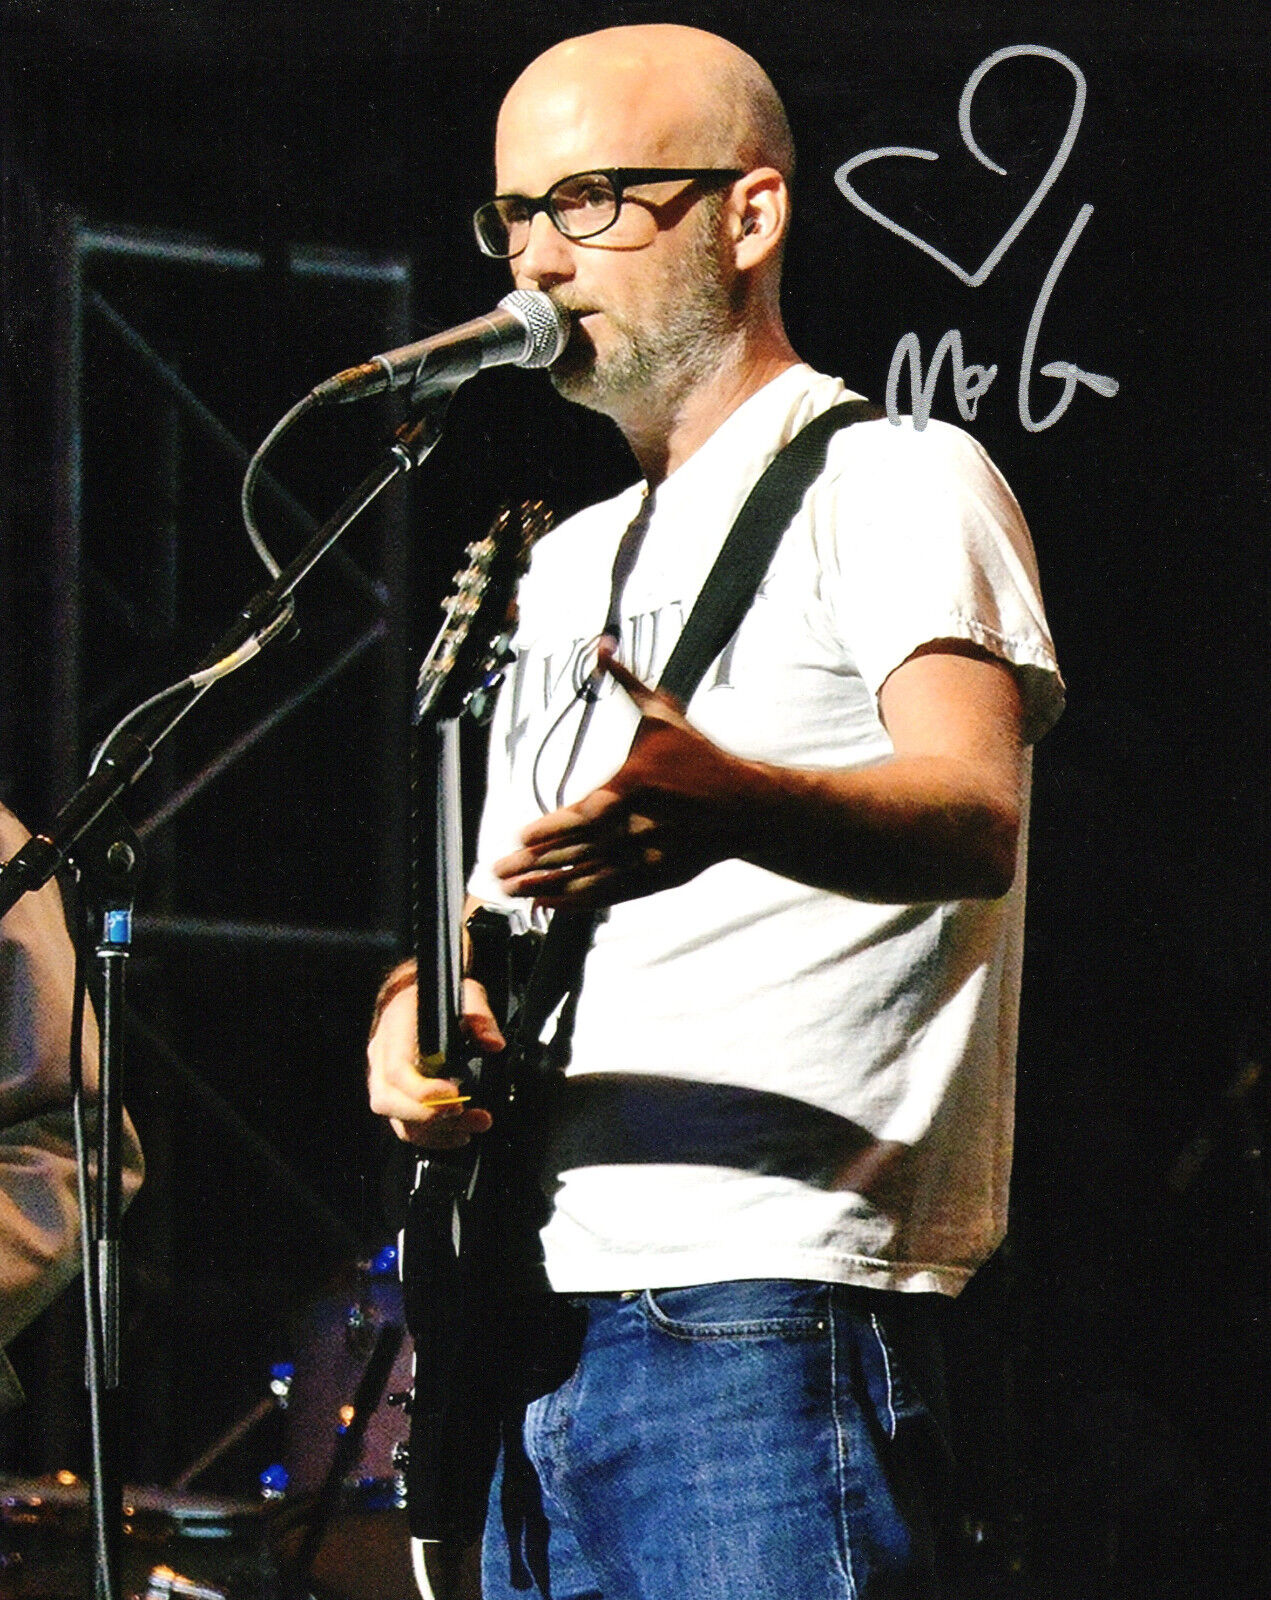 GFA Electronic Rock Star * MOBY * Signed 8x10 Photo Poster painting M1 PROOF COA